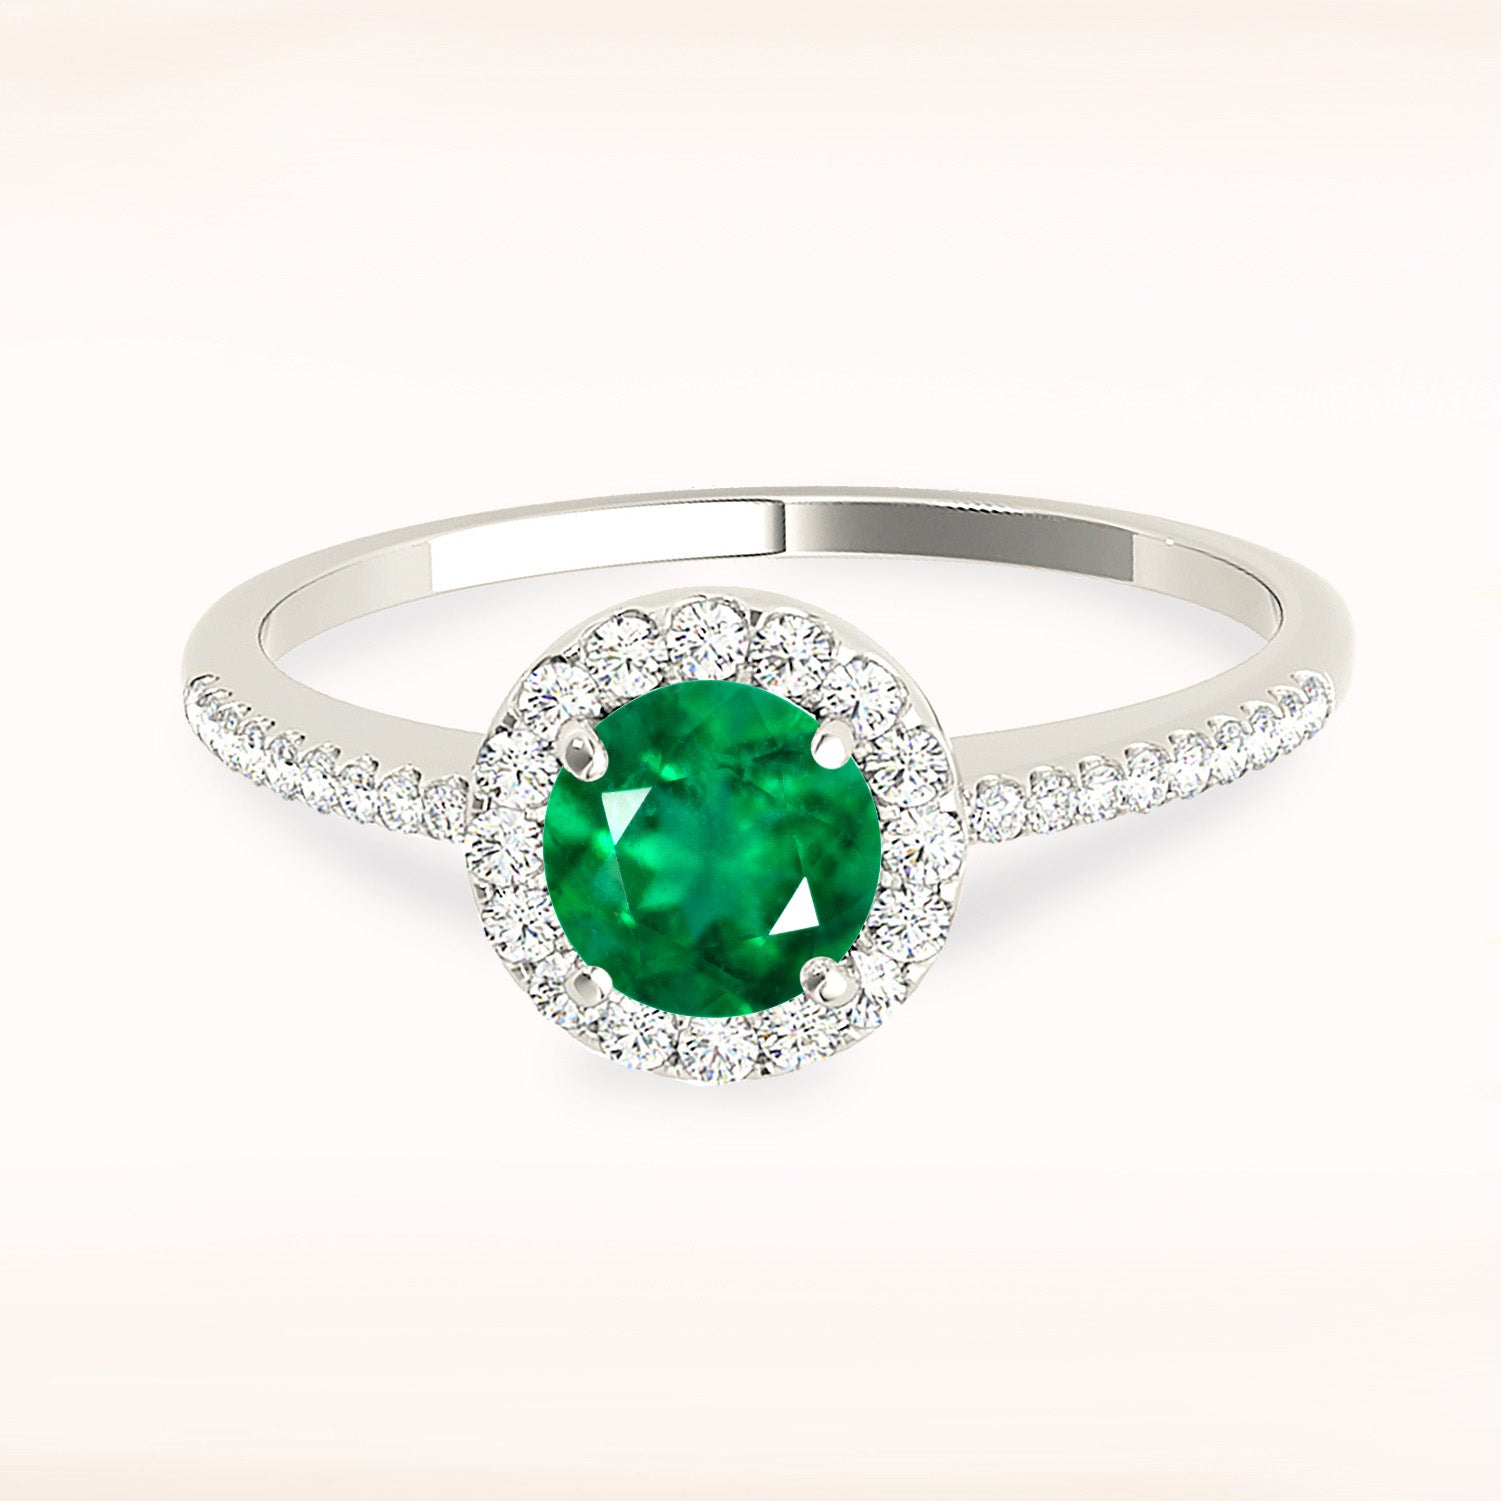 1.14 ct. Genuine Emerald Ring with 0.20 ctw. Diamond Halo And Delicate Diamond band-in 14K/18K White, Yellow, Rose Gold and Platinum - Christmas Jewelry Gift -VIRABYANI